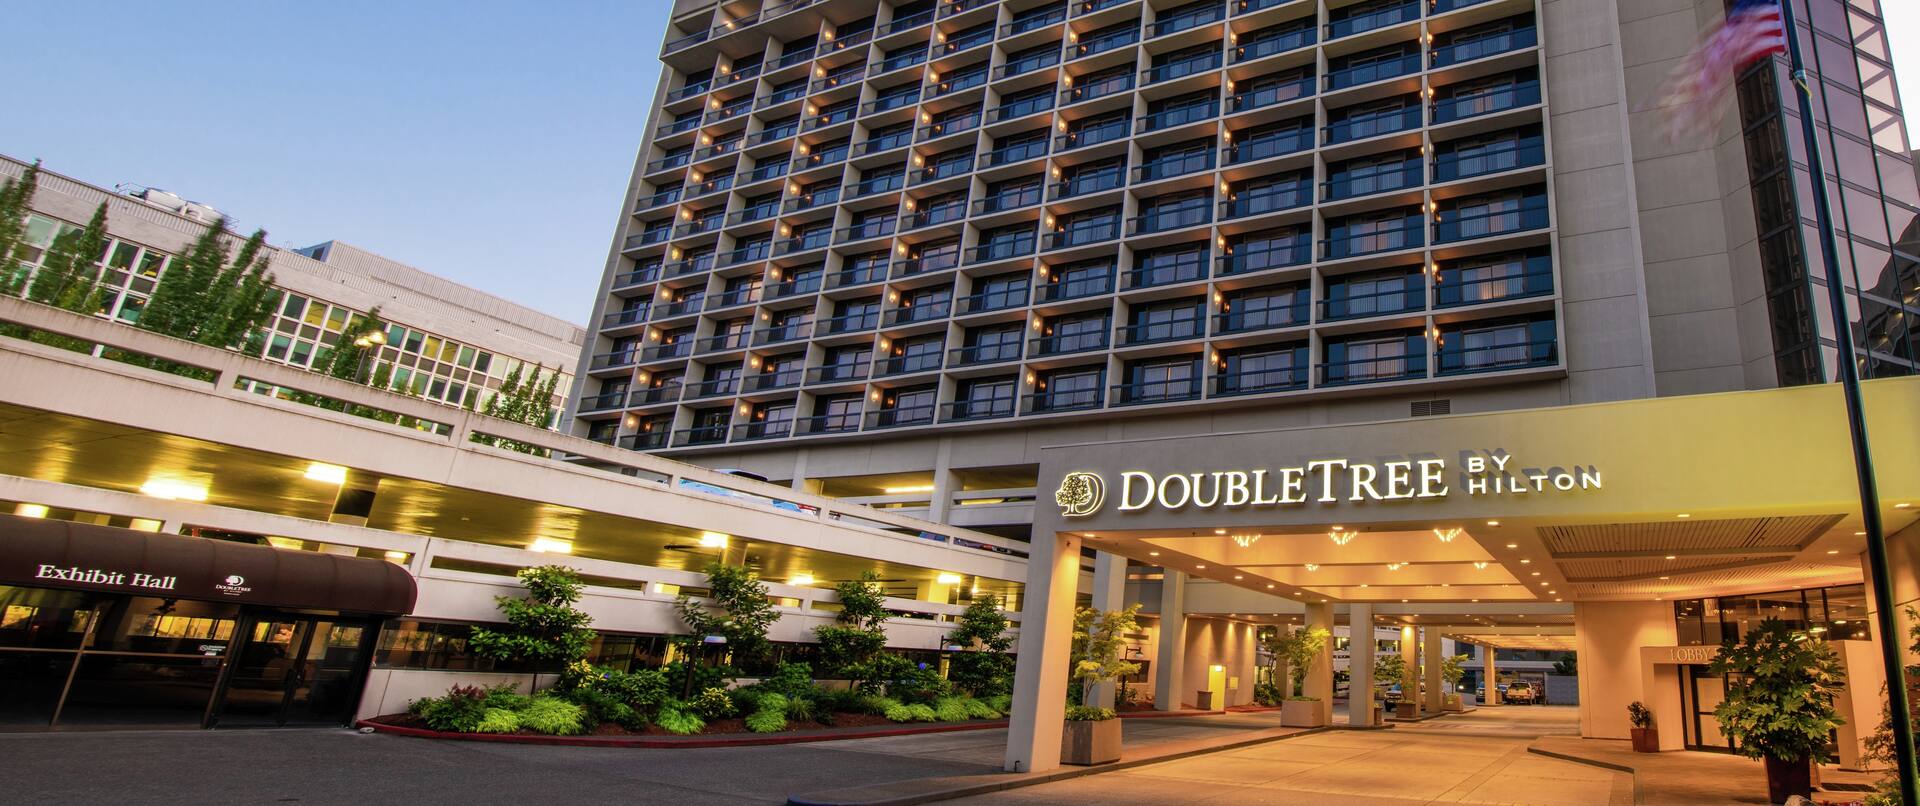 Front  Exterior of the DoubleTree Portland Hotel